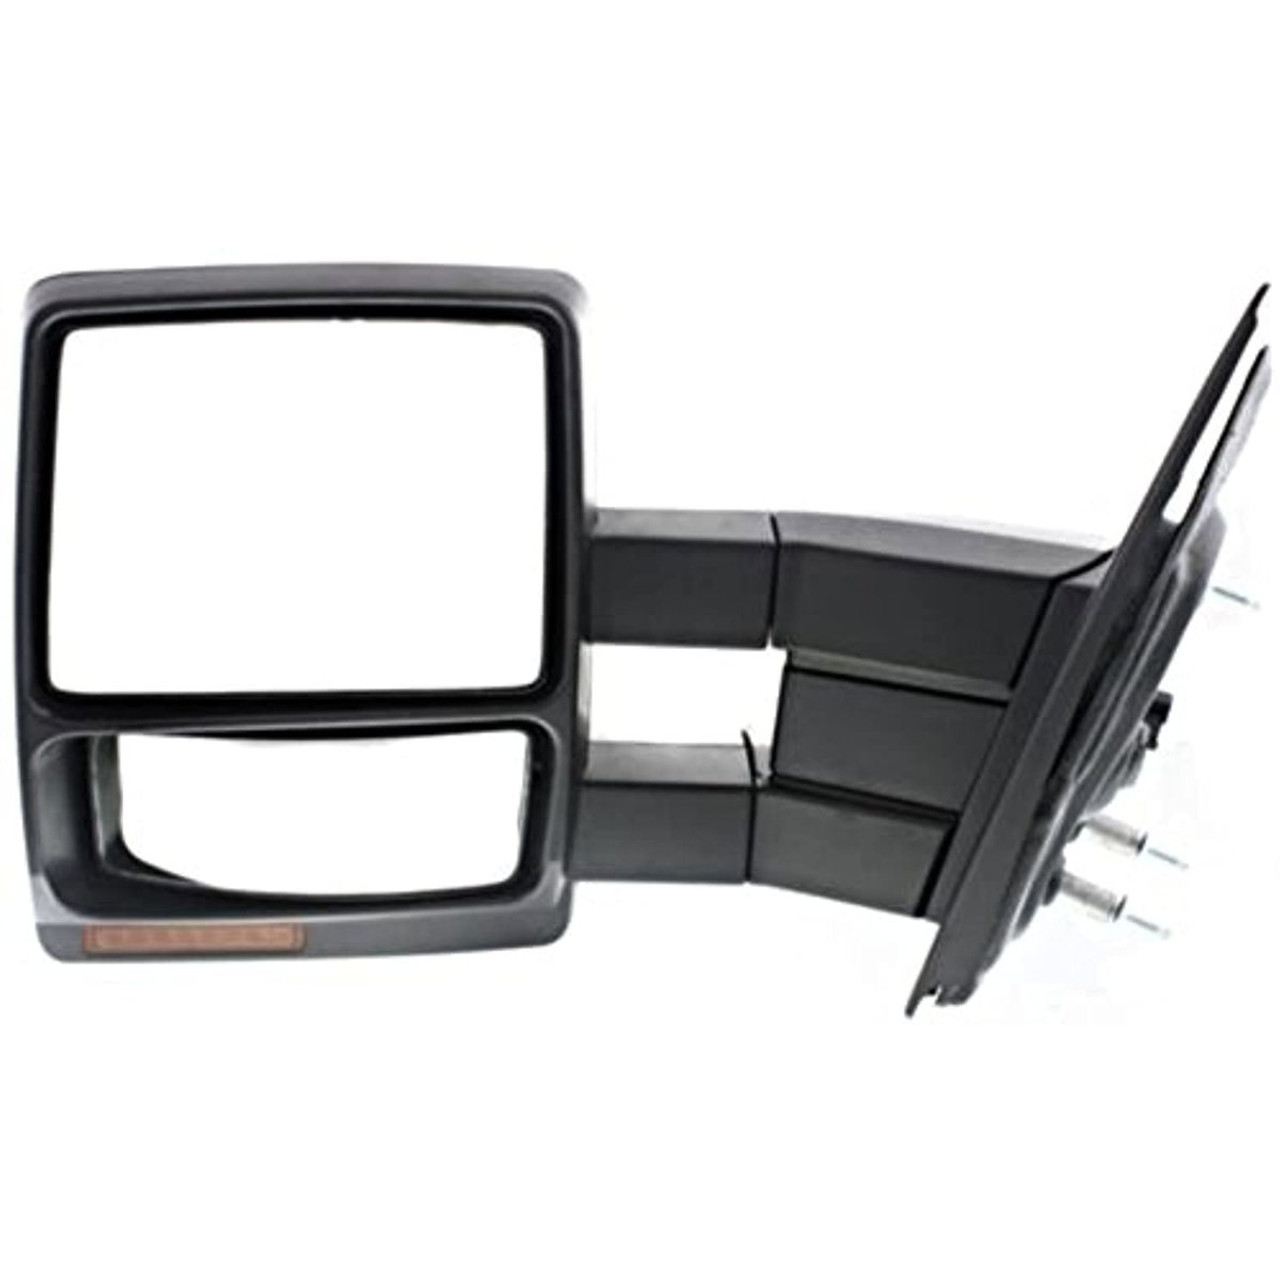 Fits 07-12 F150 Left Driver Power Mirror Tow W/Heat, Signal, Puddle Lamp